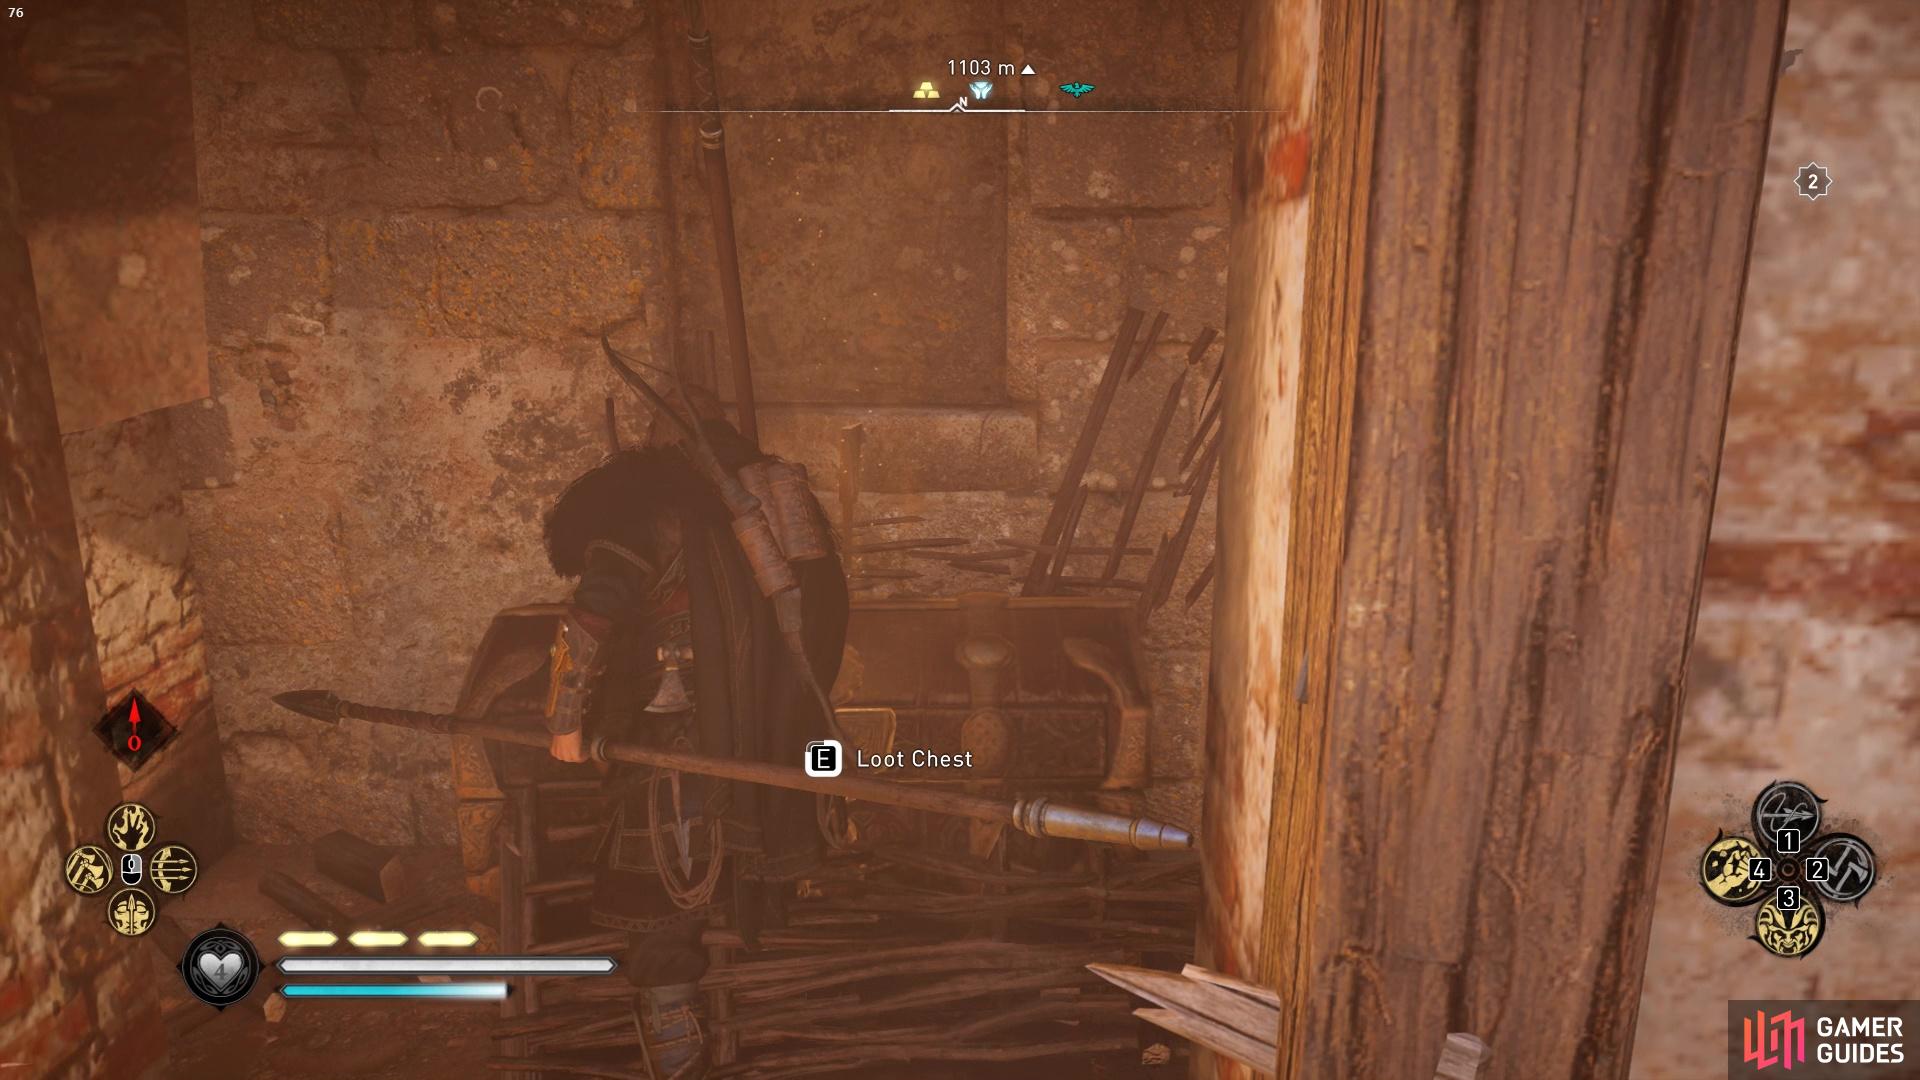 Then move the moveable barricade to get to the chest. 